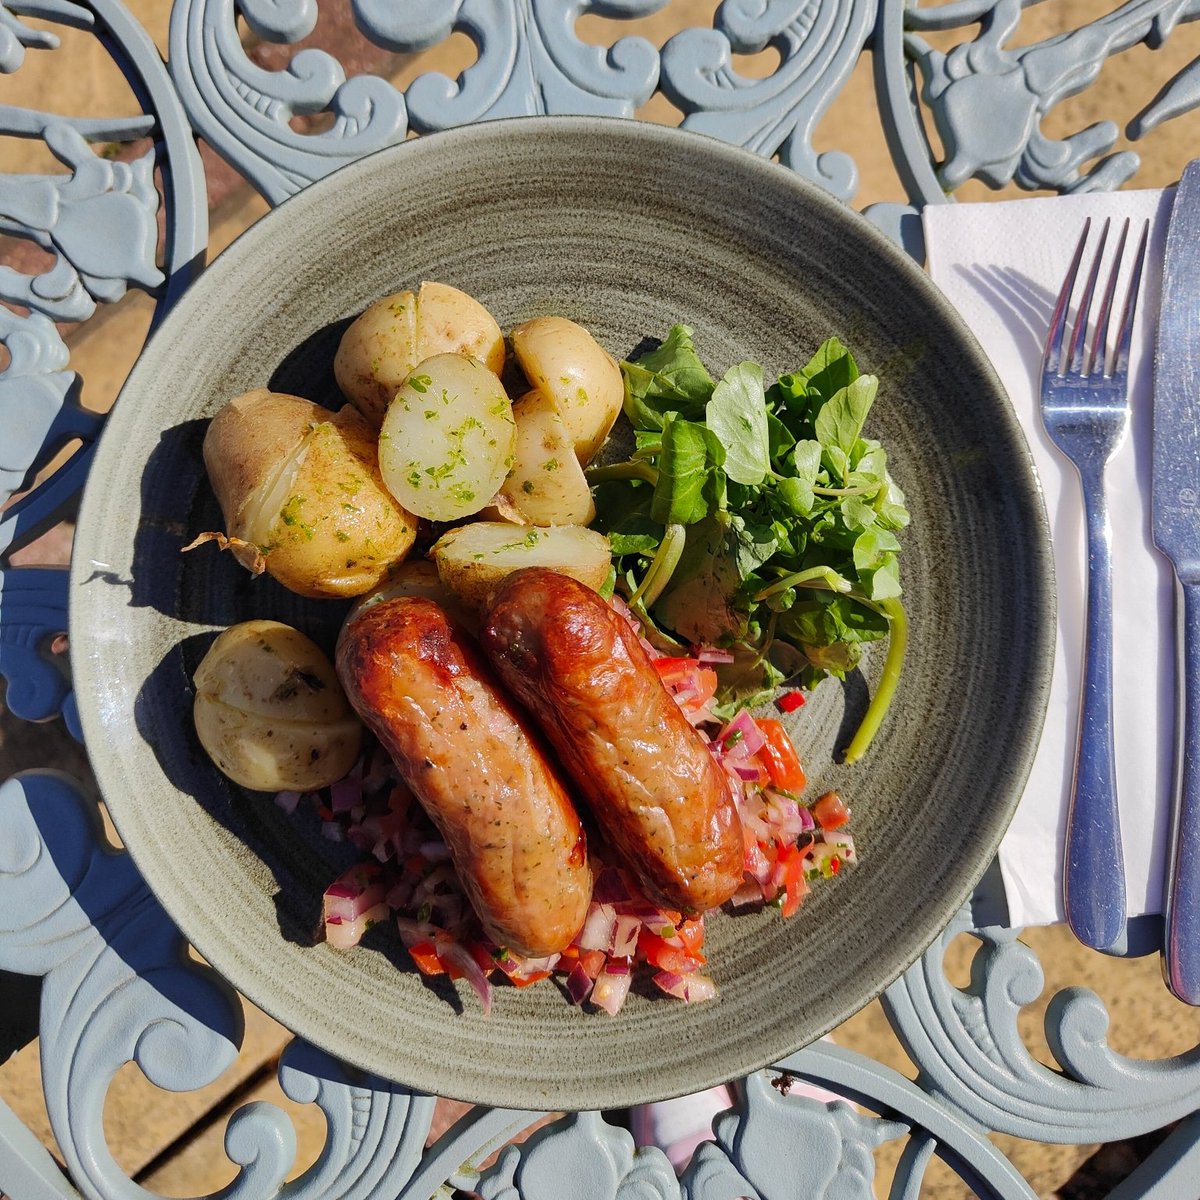 Our Cumberland sausages (which are gluten free!), new potatoes, apricot & chilli salsa, is the perfect dish for the weather we are having!

#Sausages #Food #Foodie #SummerAtYoungs #YounhsChefs #HampshireBlogger #HampshireFoodie #BasingstokeFoodie #BasingstokeBlogger